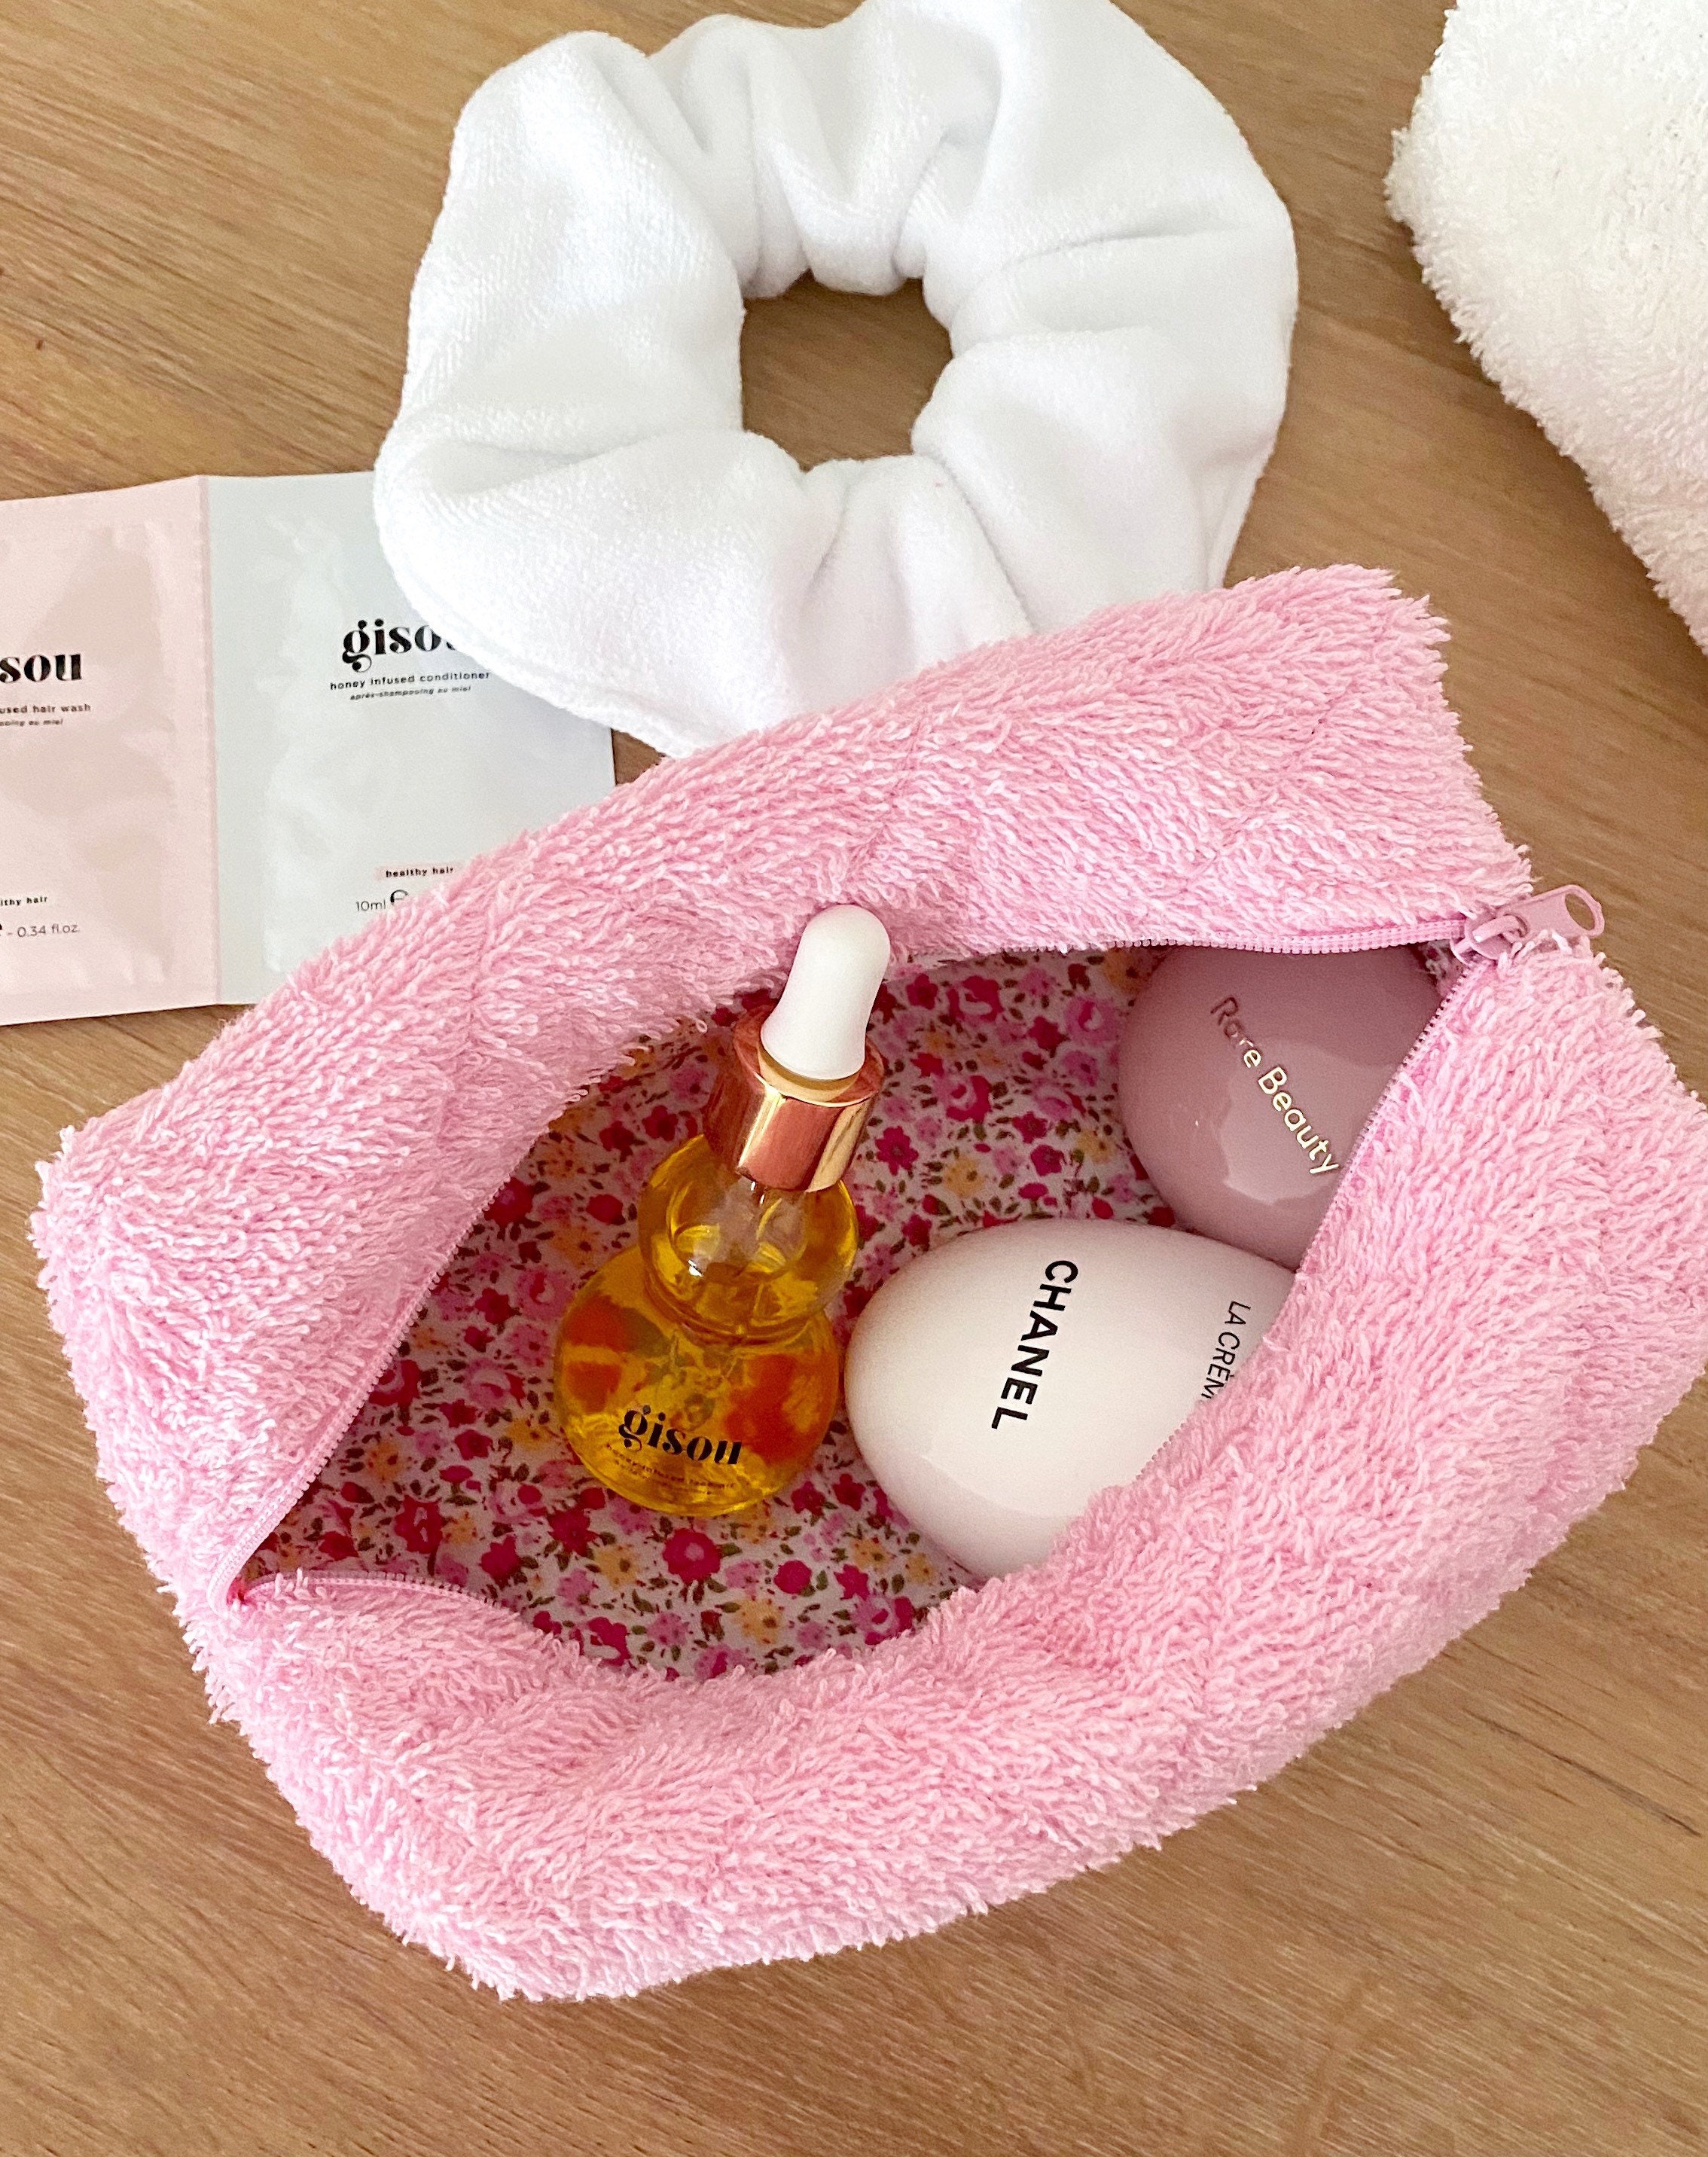 Makeup Bag Terrycloth Towelling Cosmetics Bag Cream Teddy Floral Toiletry  Travel Bag Sherpa Soft 